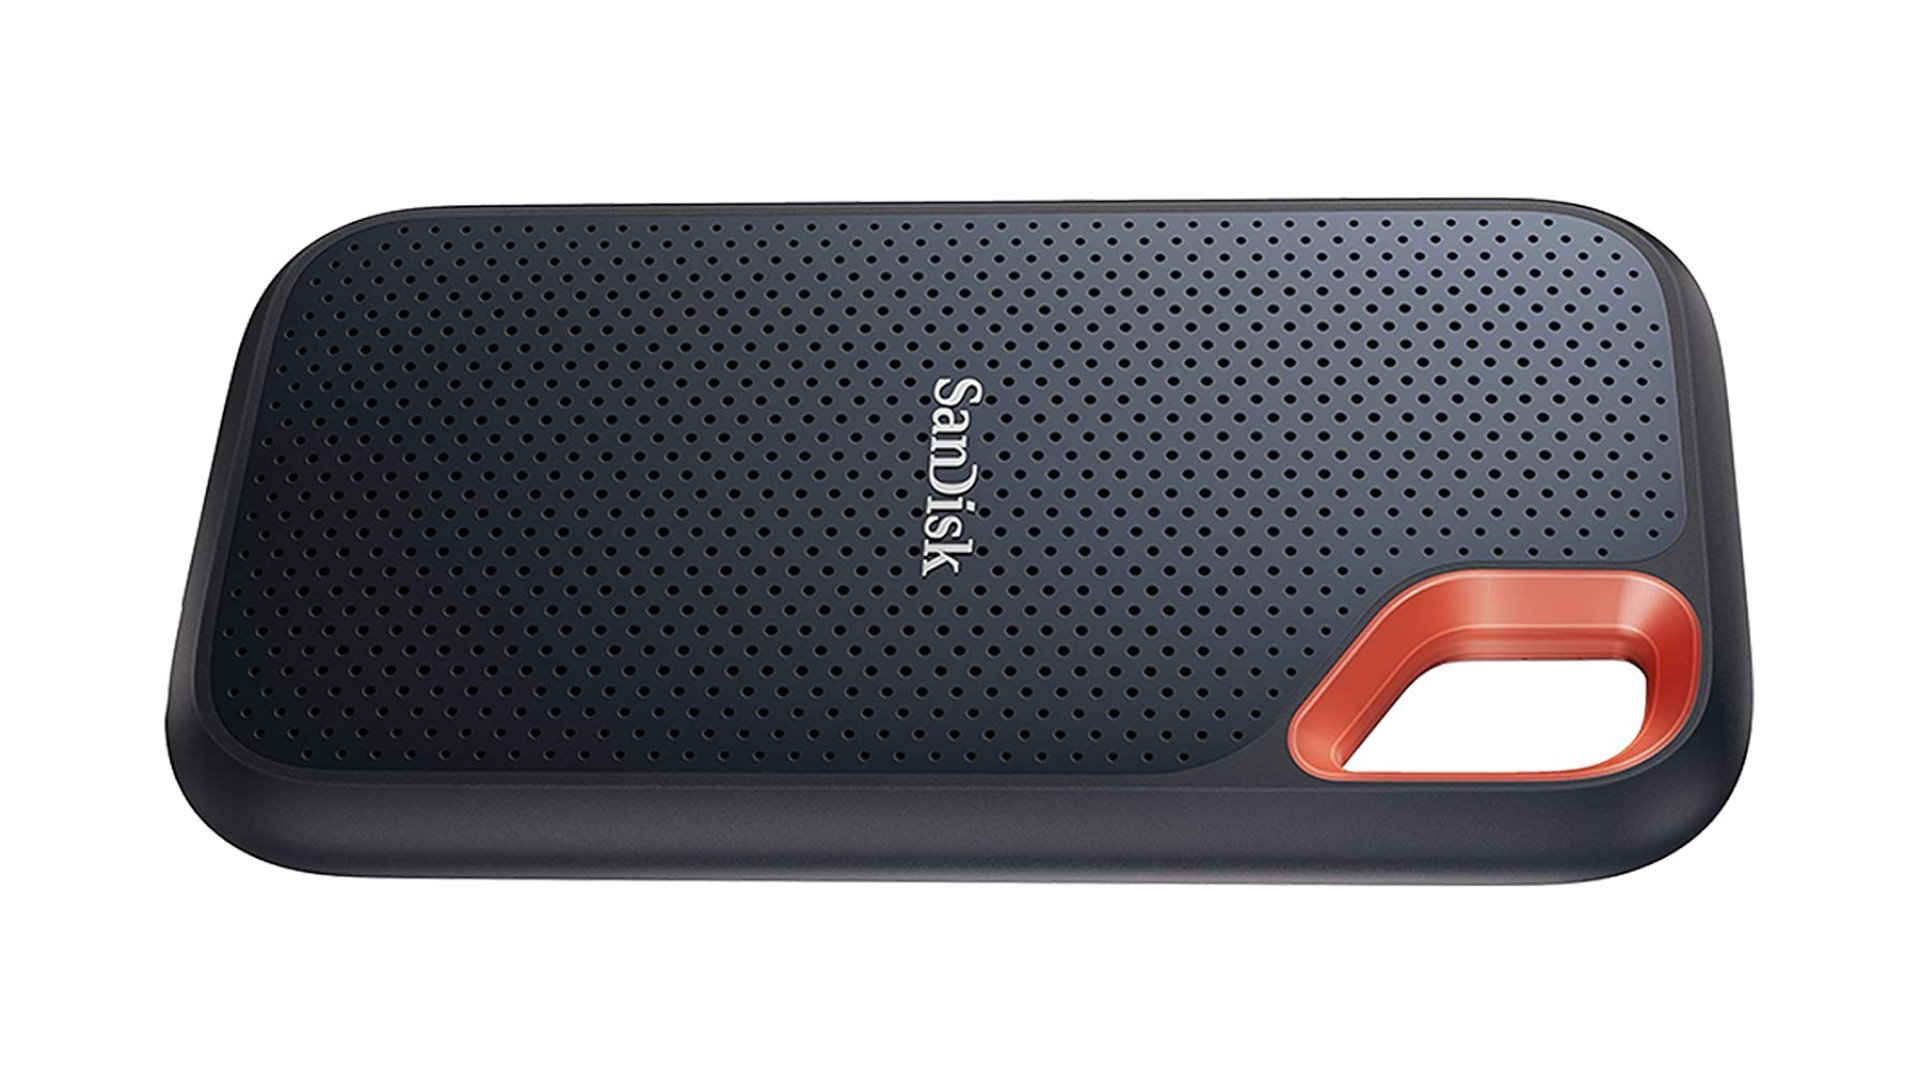 The best external SSD is the SanDisk Extreme Portable SSD